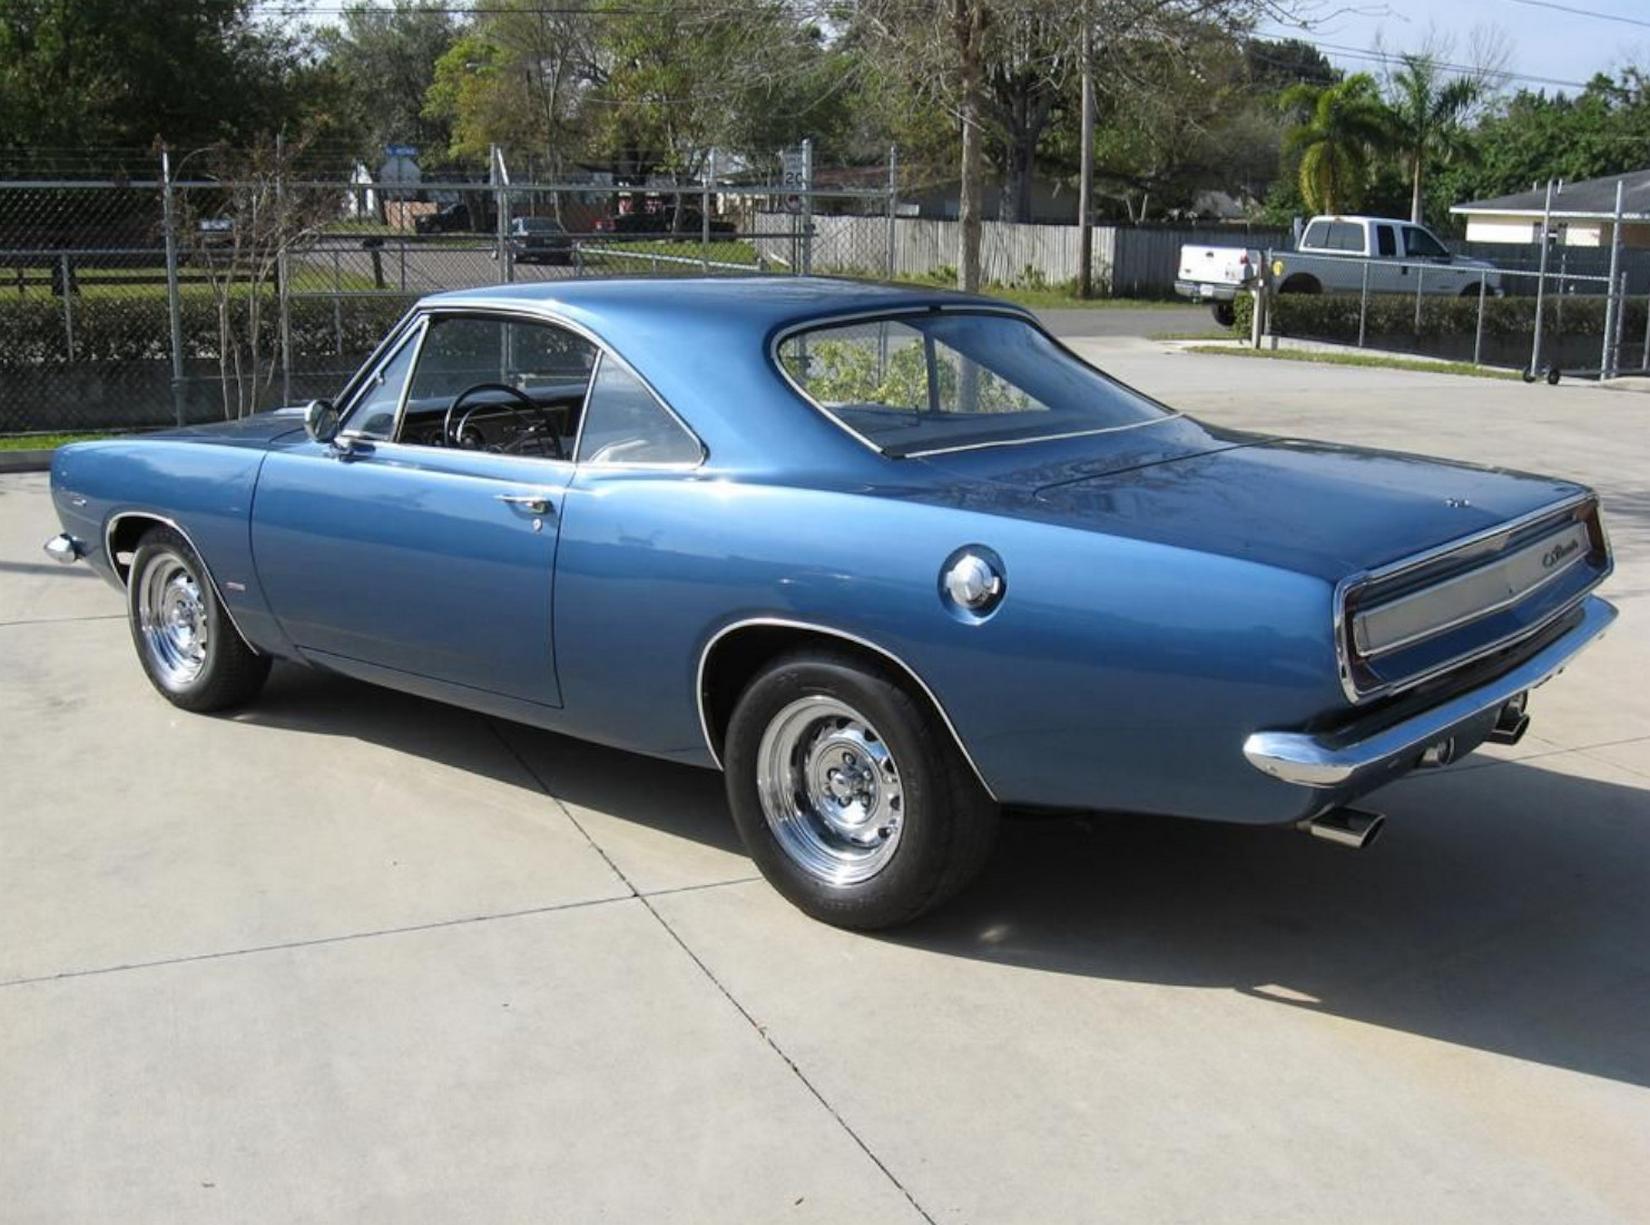 1967 – 1969 Plymouth Barracuda Guide: Specs, Performance, & More